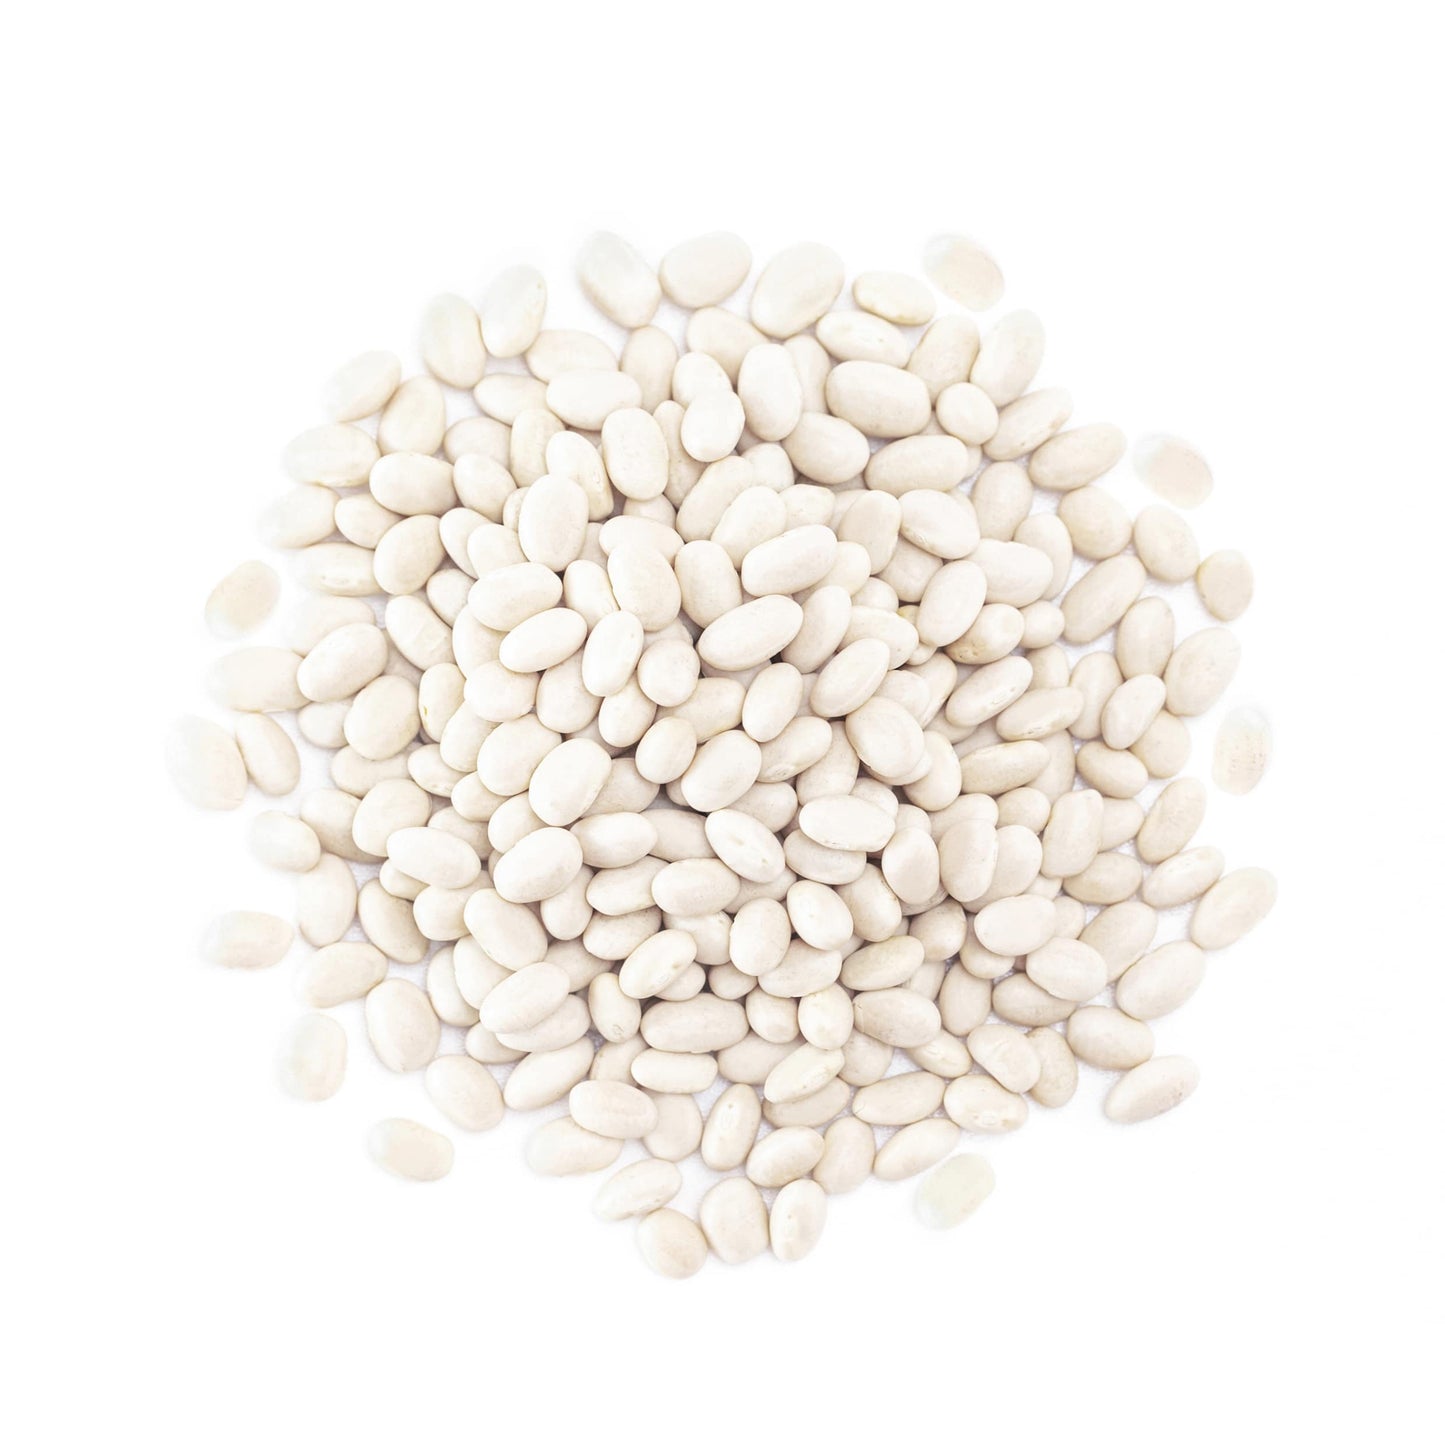 Navy Beans — Non-GMO Verified, Raw, Dried, Vegan, Kosher, Whole Small White Kidney Beans in Bulk, Good Source of Protein, Fiber, Folate, and Copper. Low Sodium. Great for Cooking and Soups